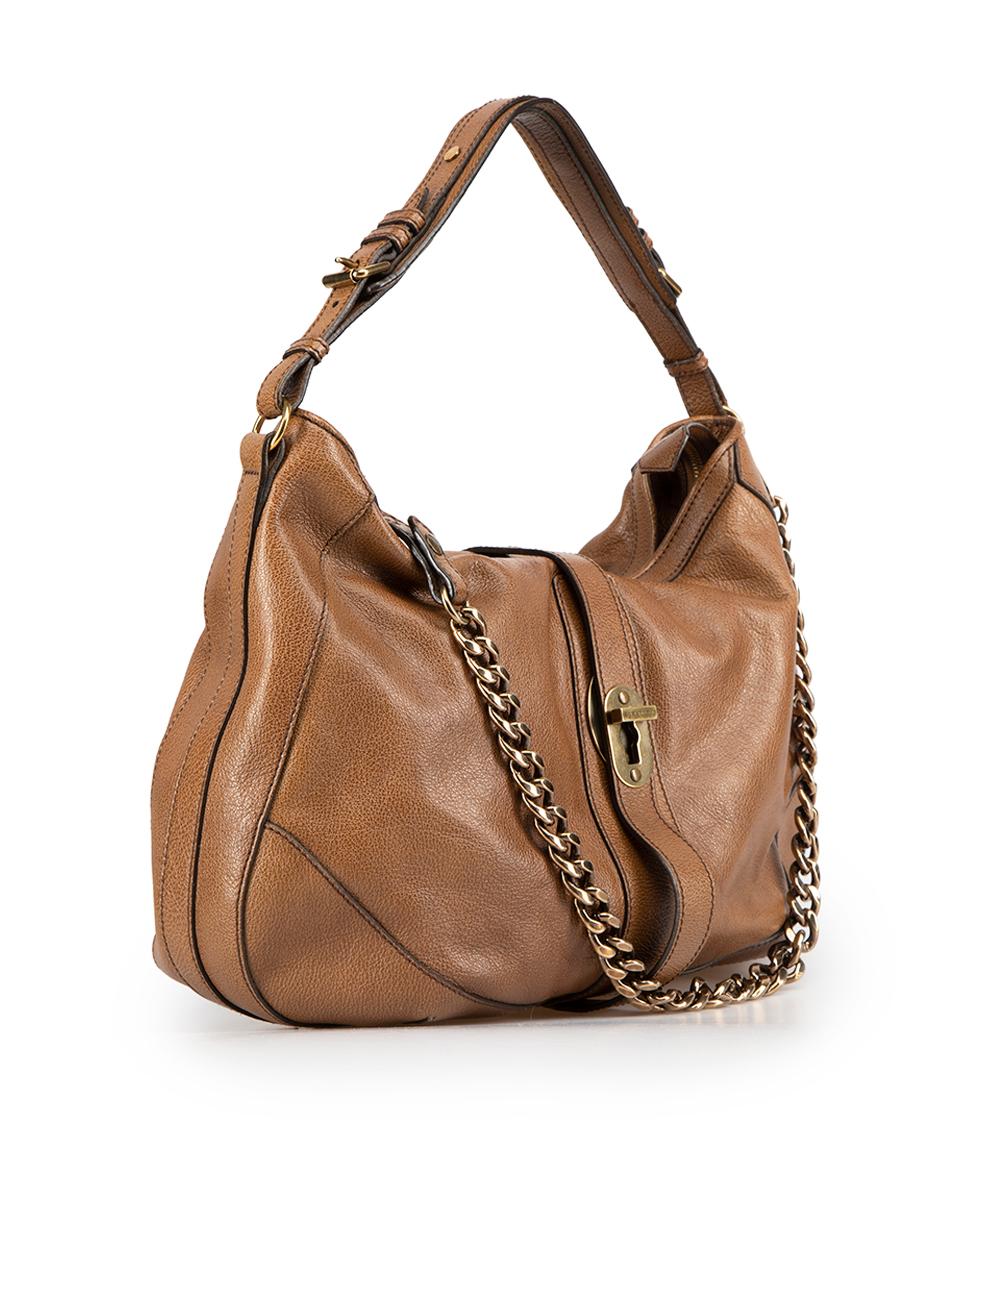 Women's Burberry Brown Leather Weatherby Hobo Tote Bag